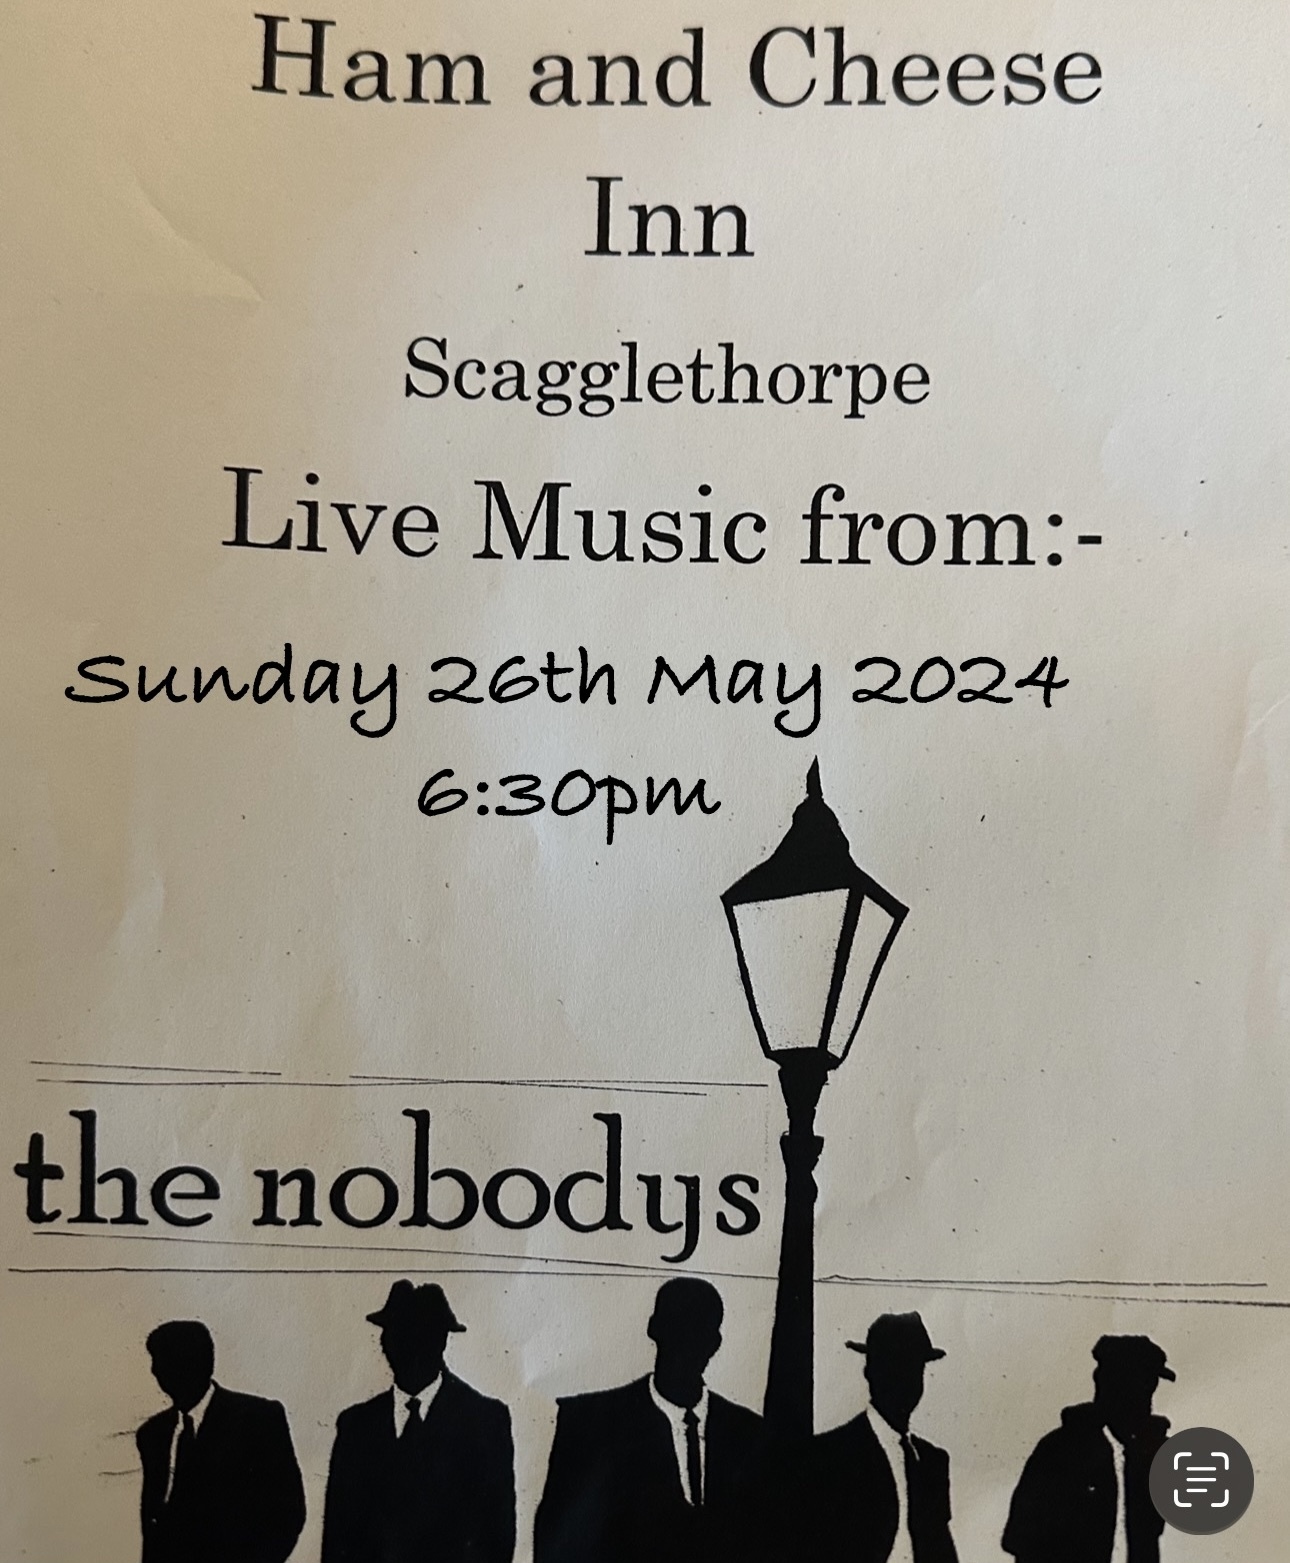 Sunday 26th May 2024 - The Nobodys